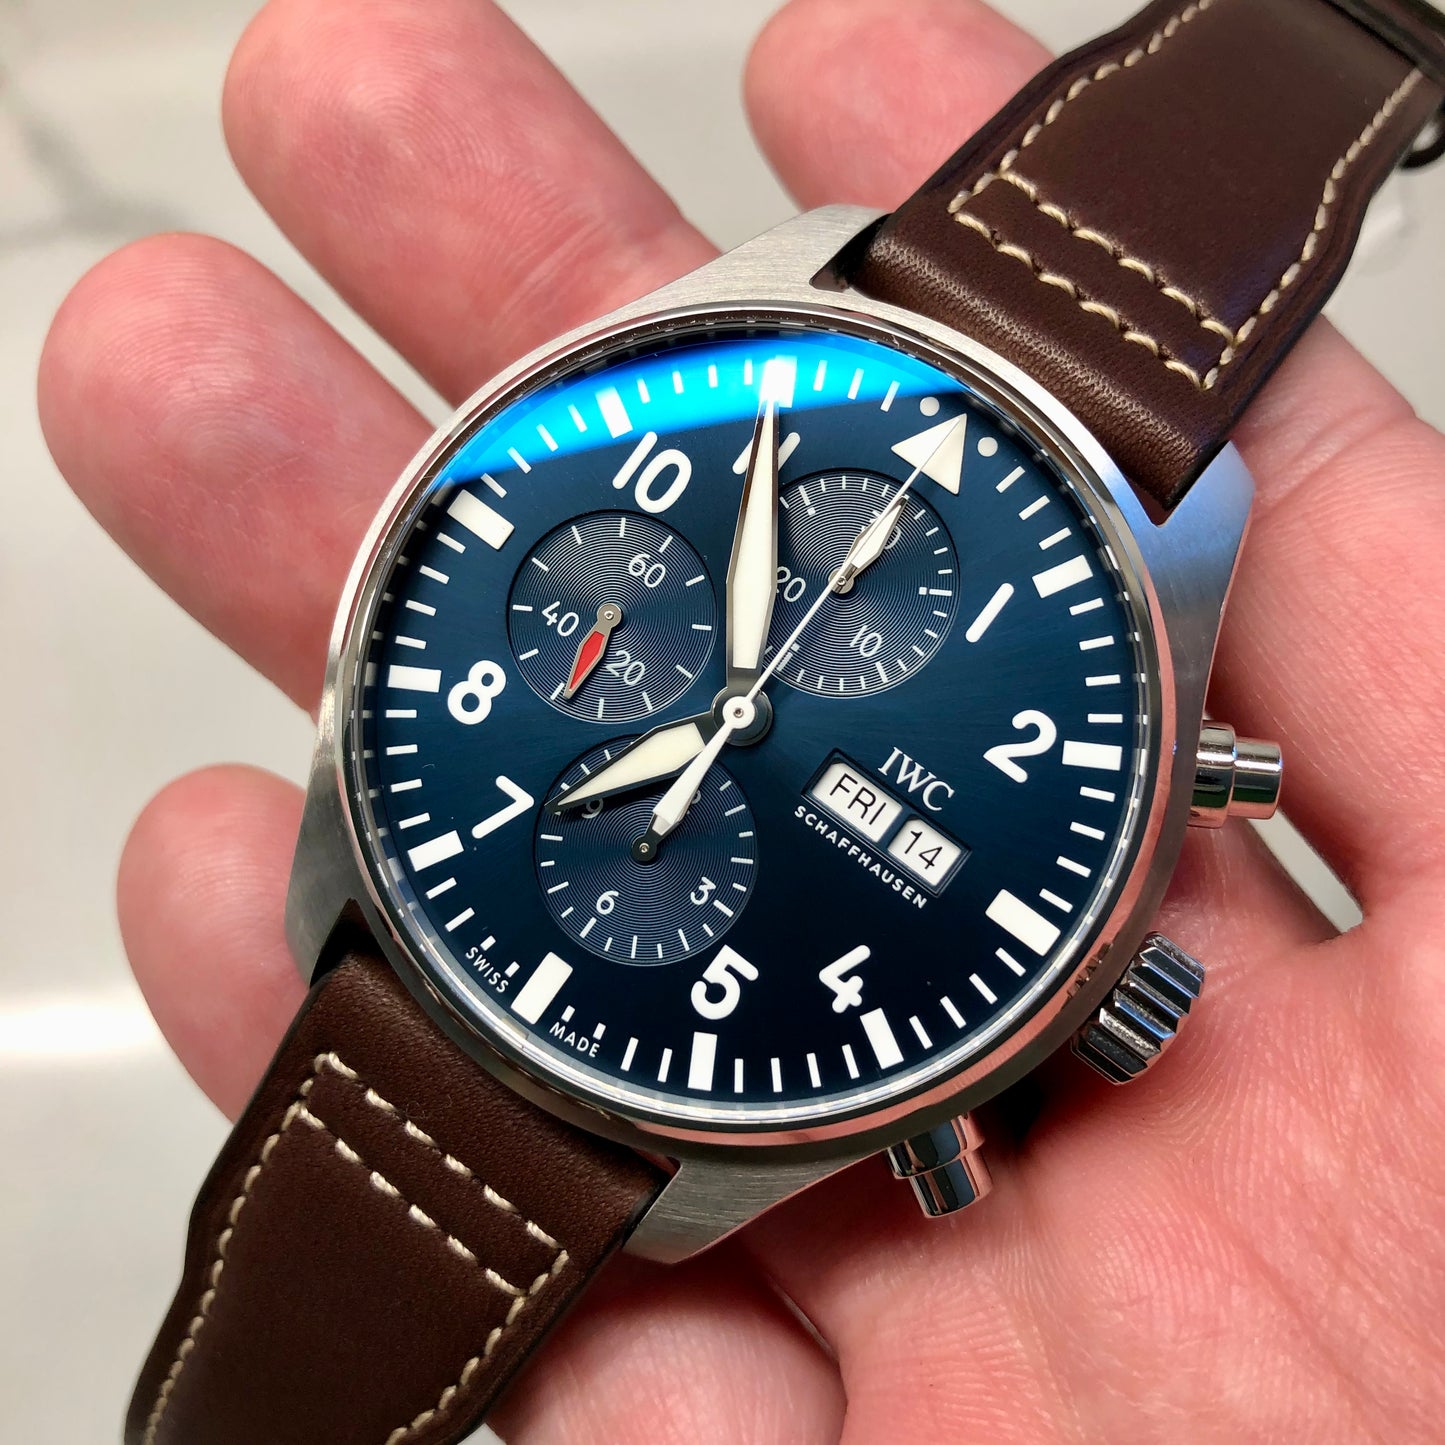 2023 IWC Pilot IW377714 LePetit Prince Automatic Chronograph Day Date 43mm Blue Wristwatch with Box and Papers - Hashtag Watch Company